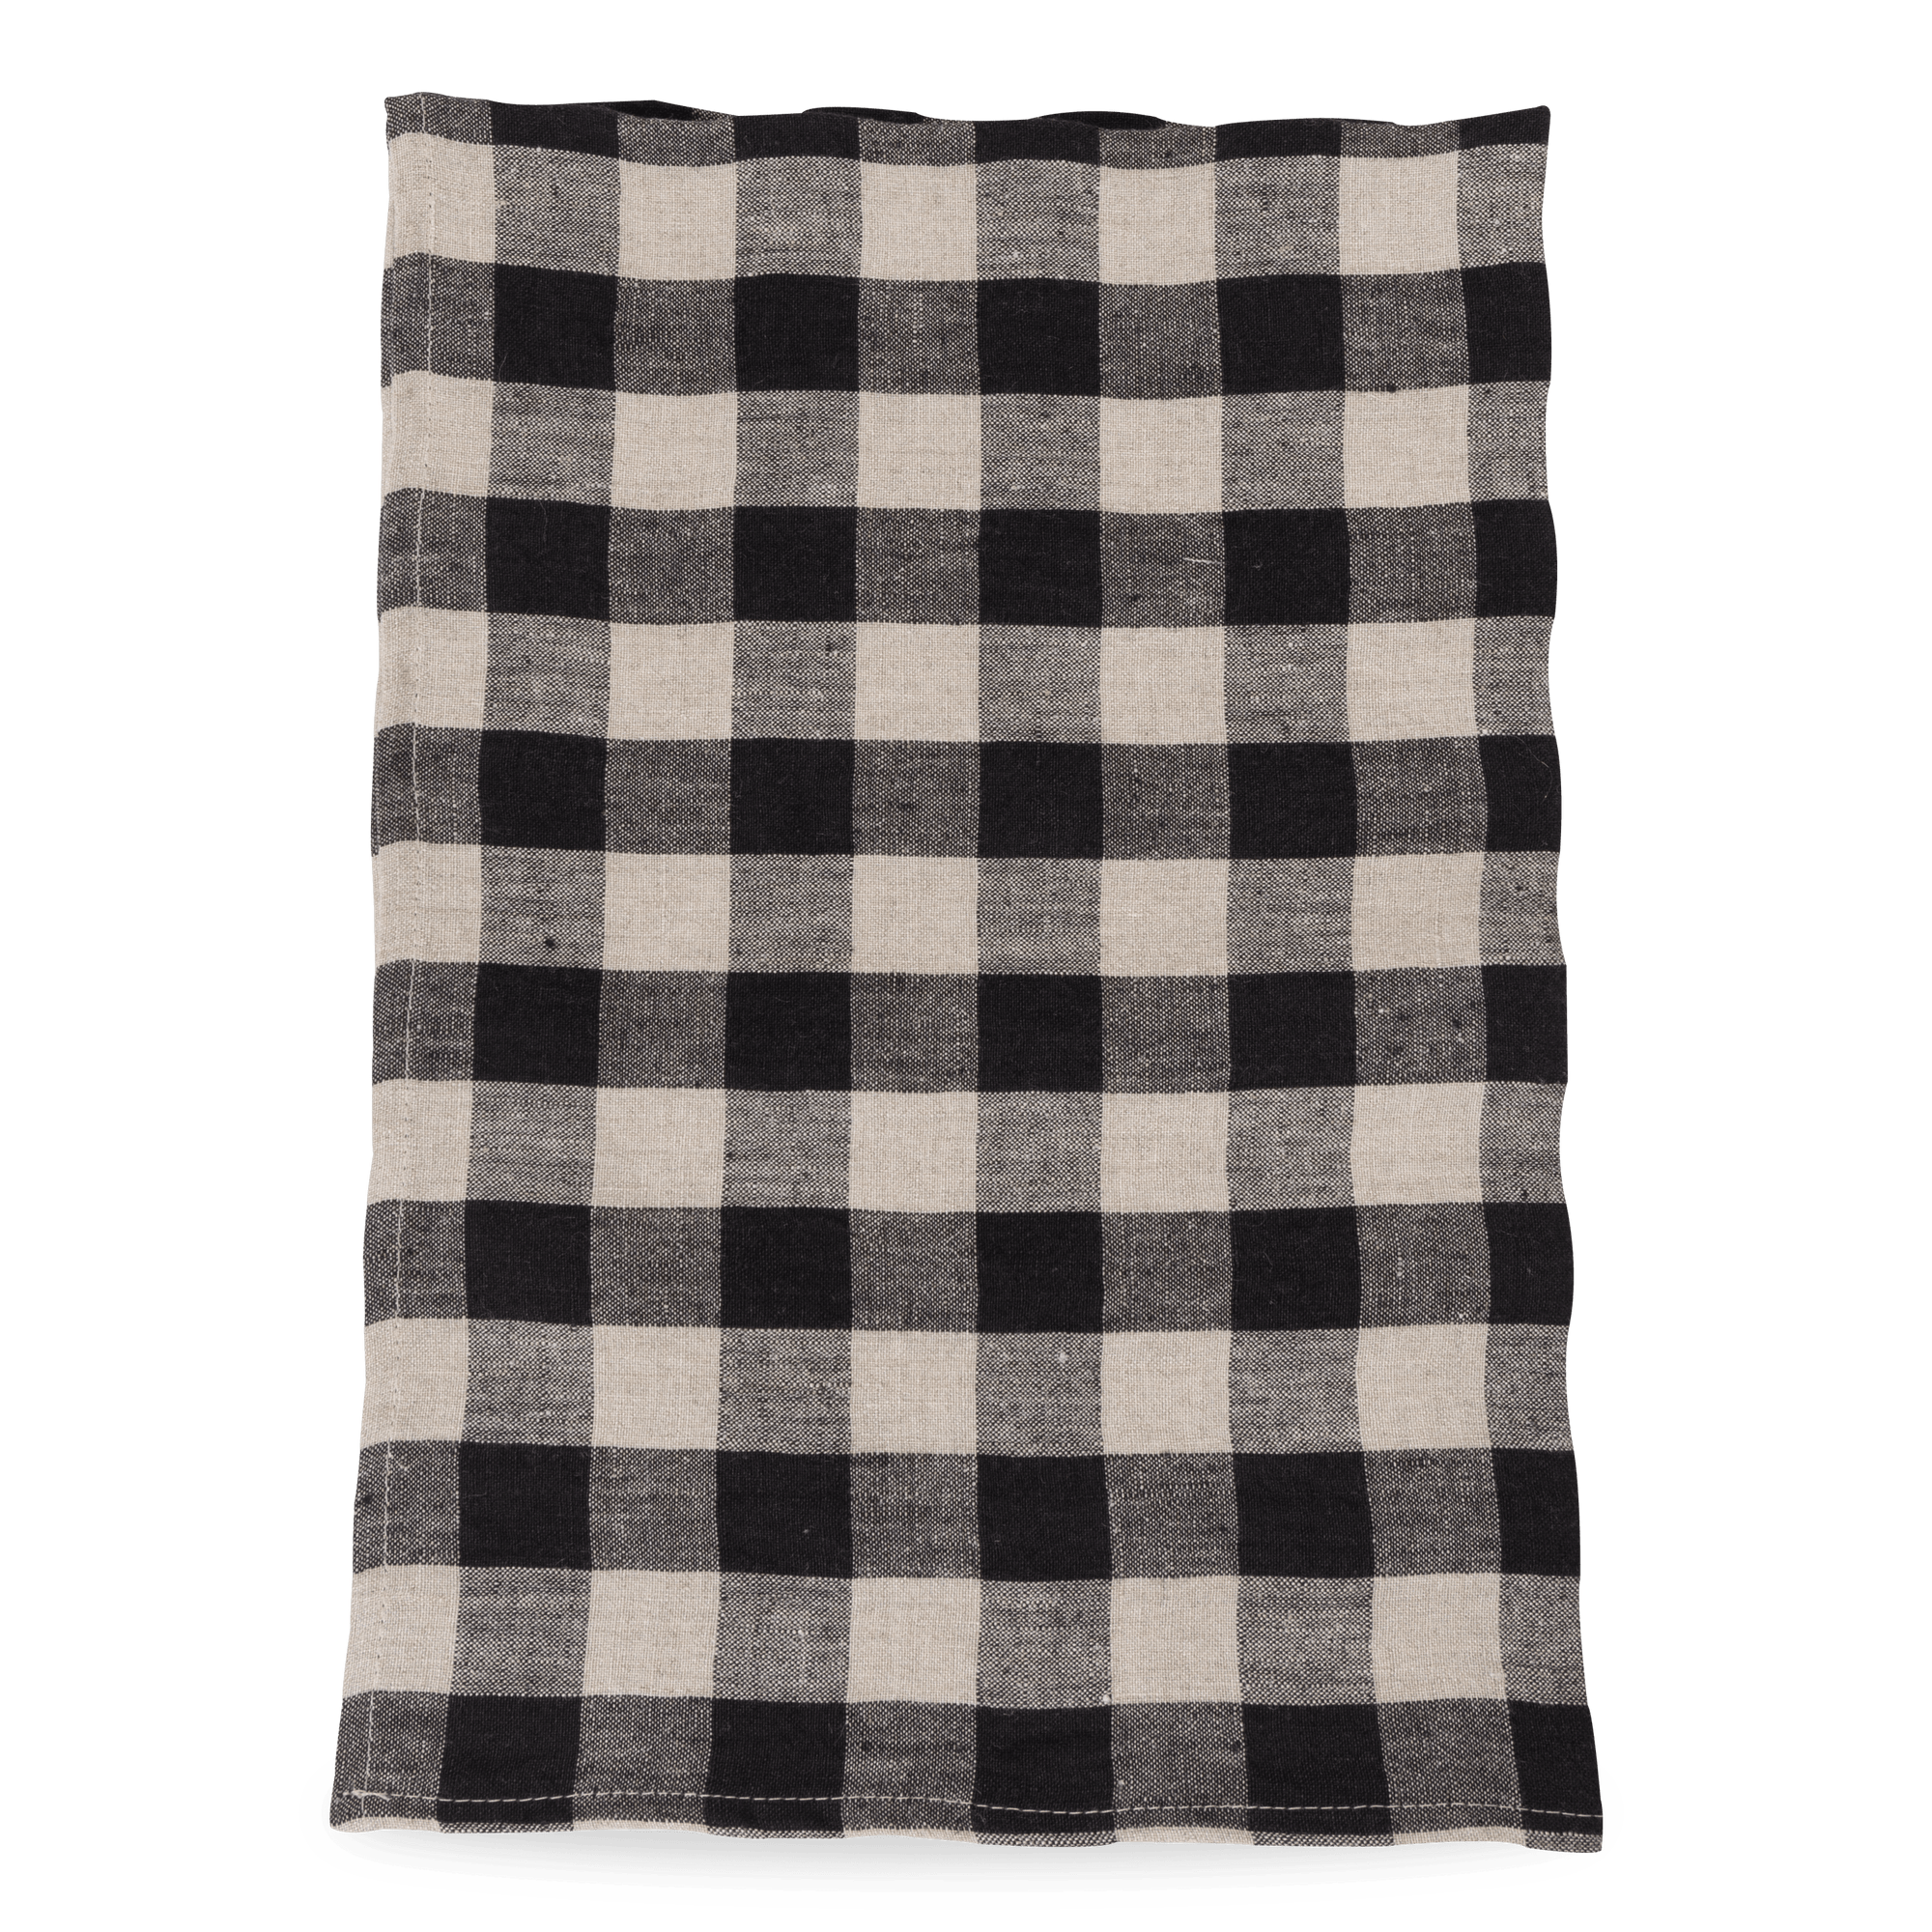 Made from 100% linen, the Linen Check Tea Towel features a generously soft texture and checkered pattern.